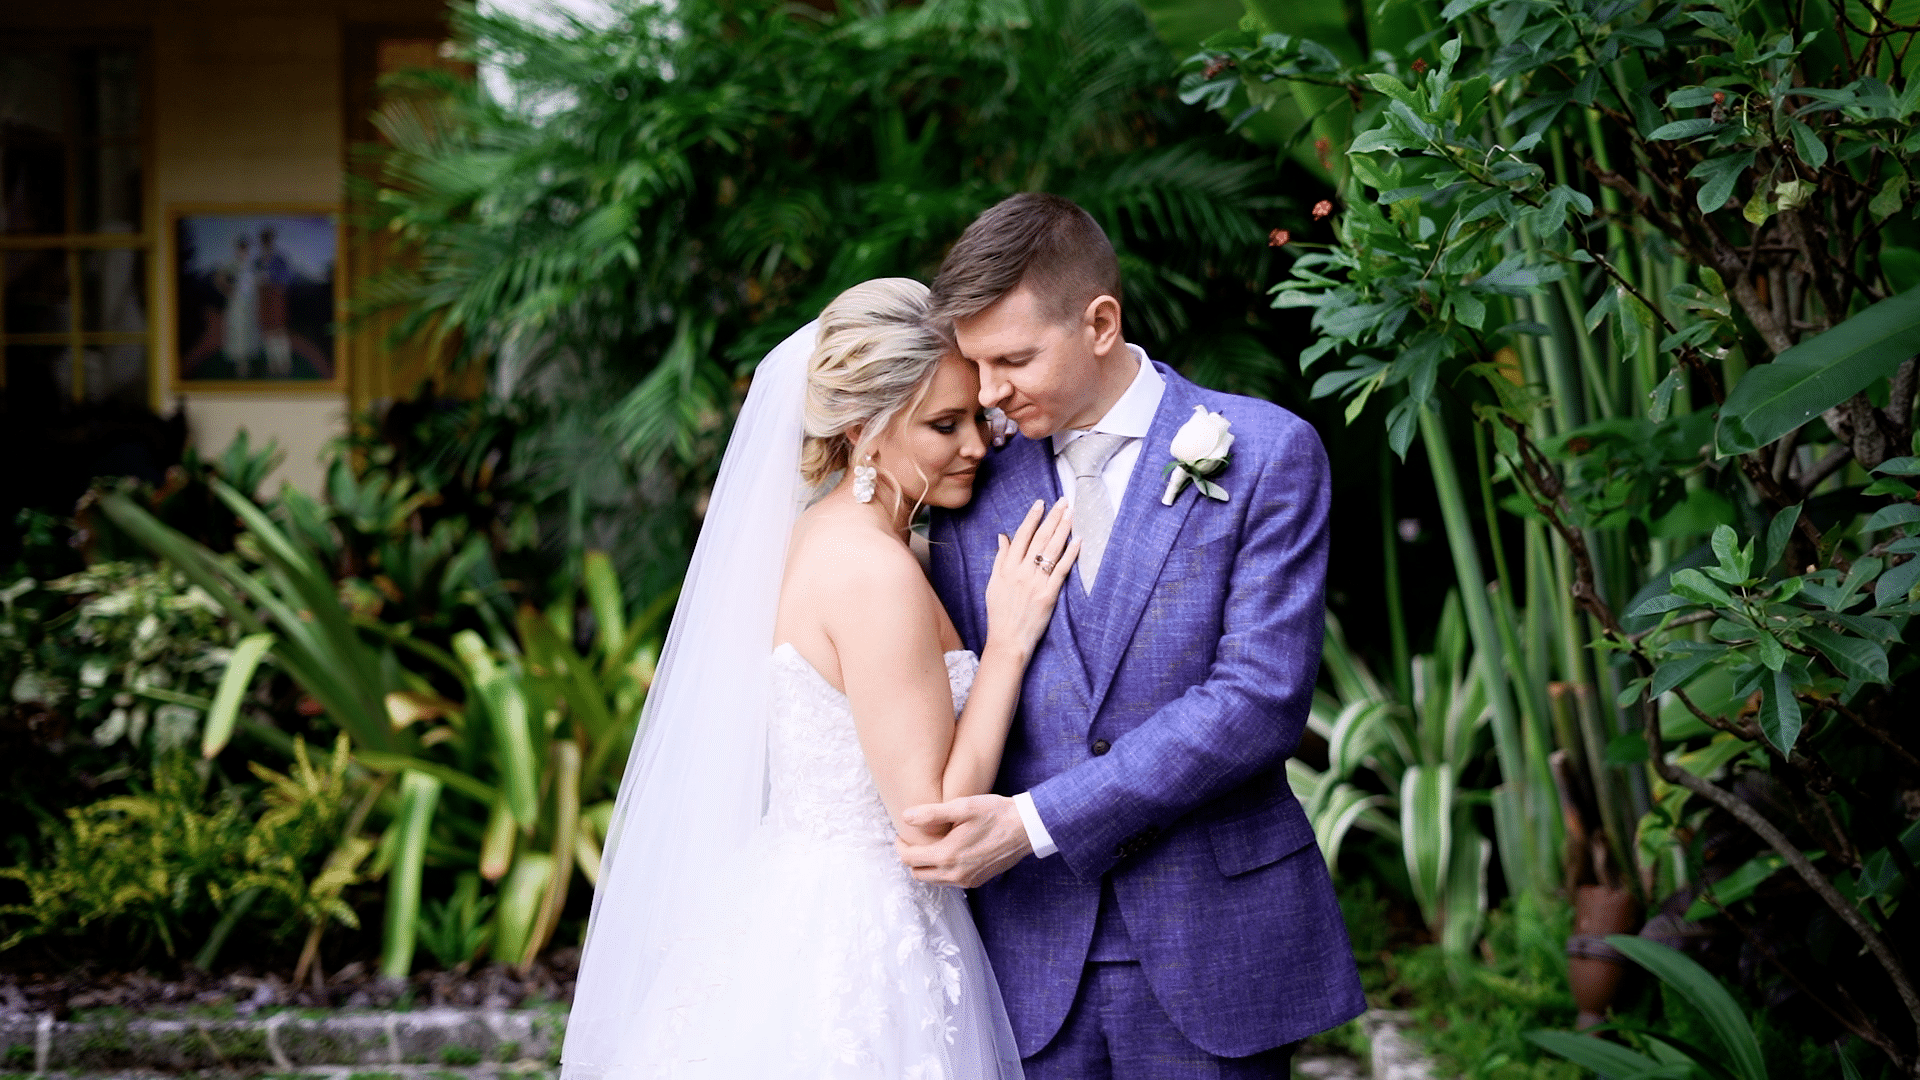 Bride and groom embracing in front of lush tropical plants